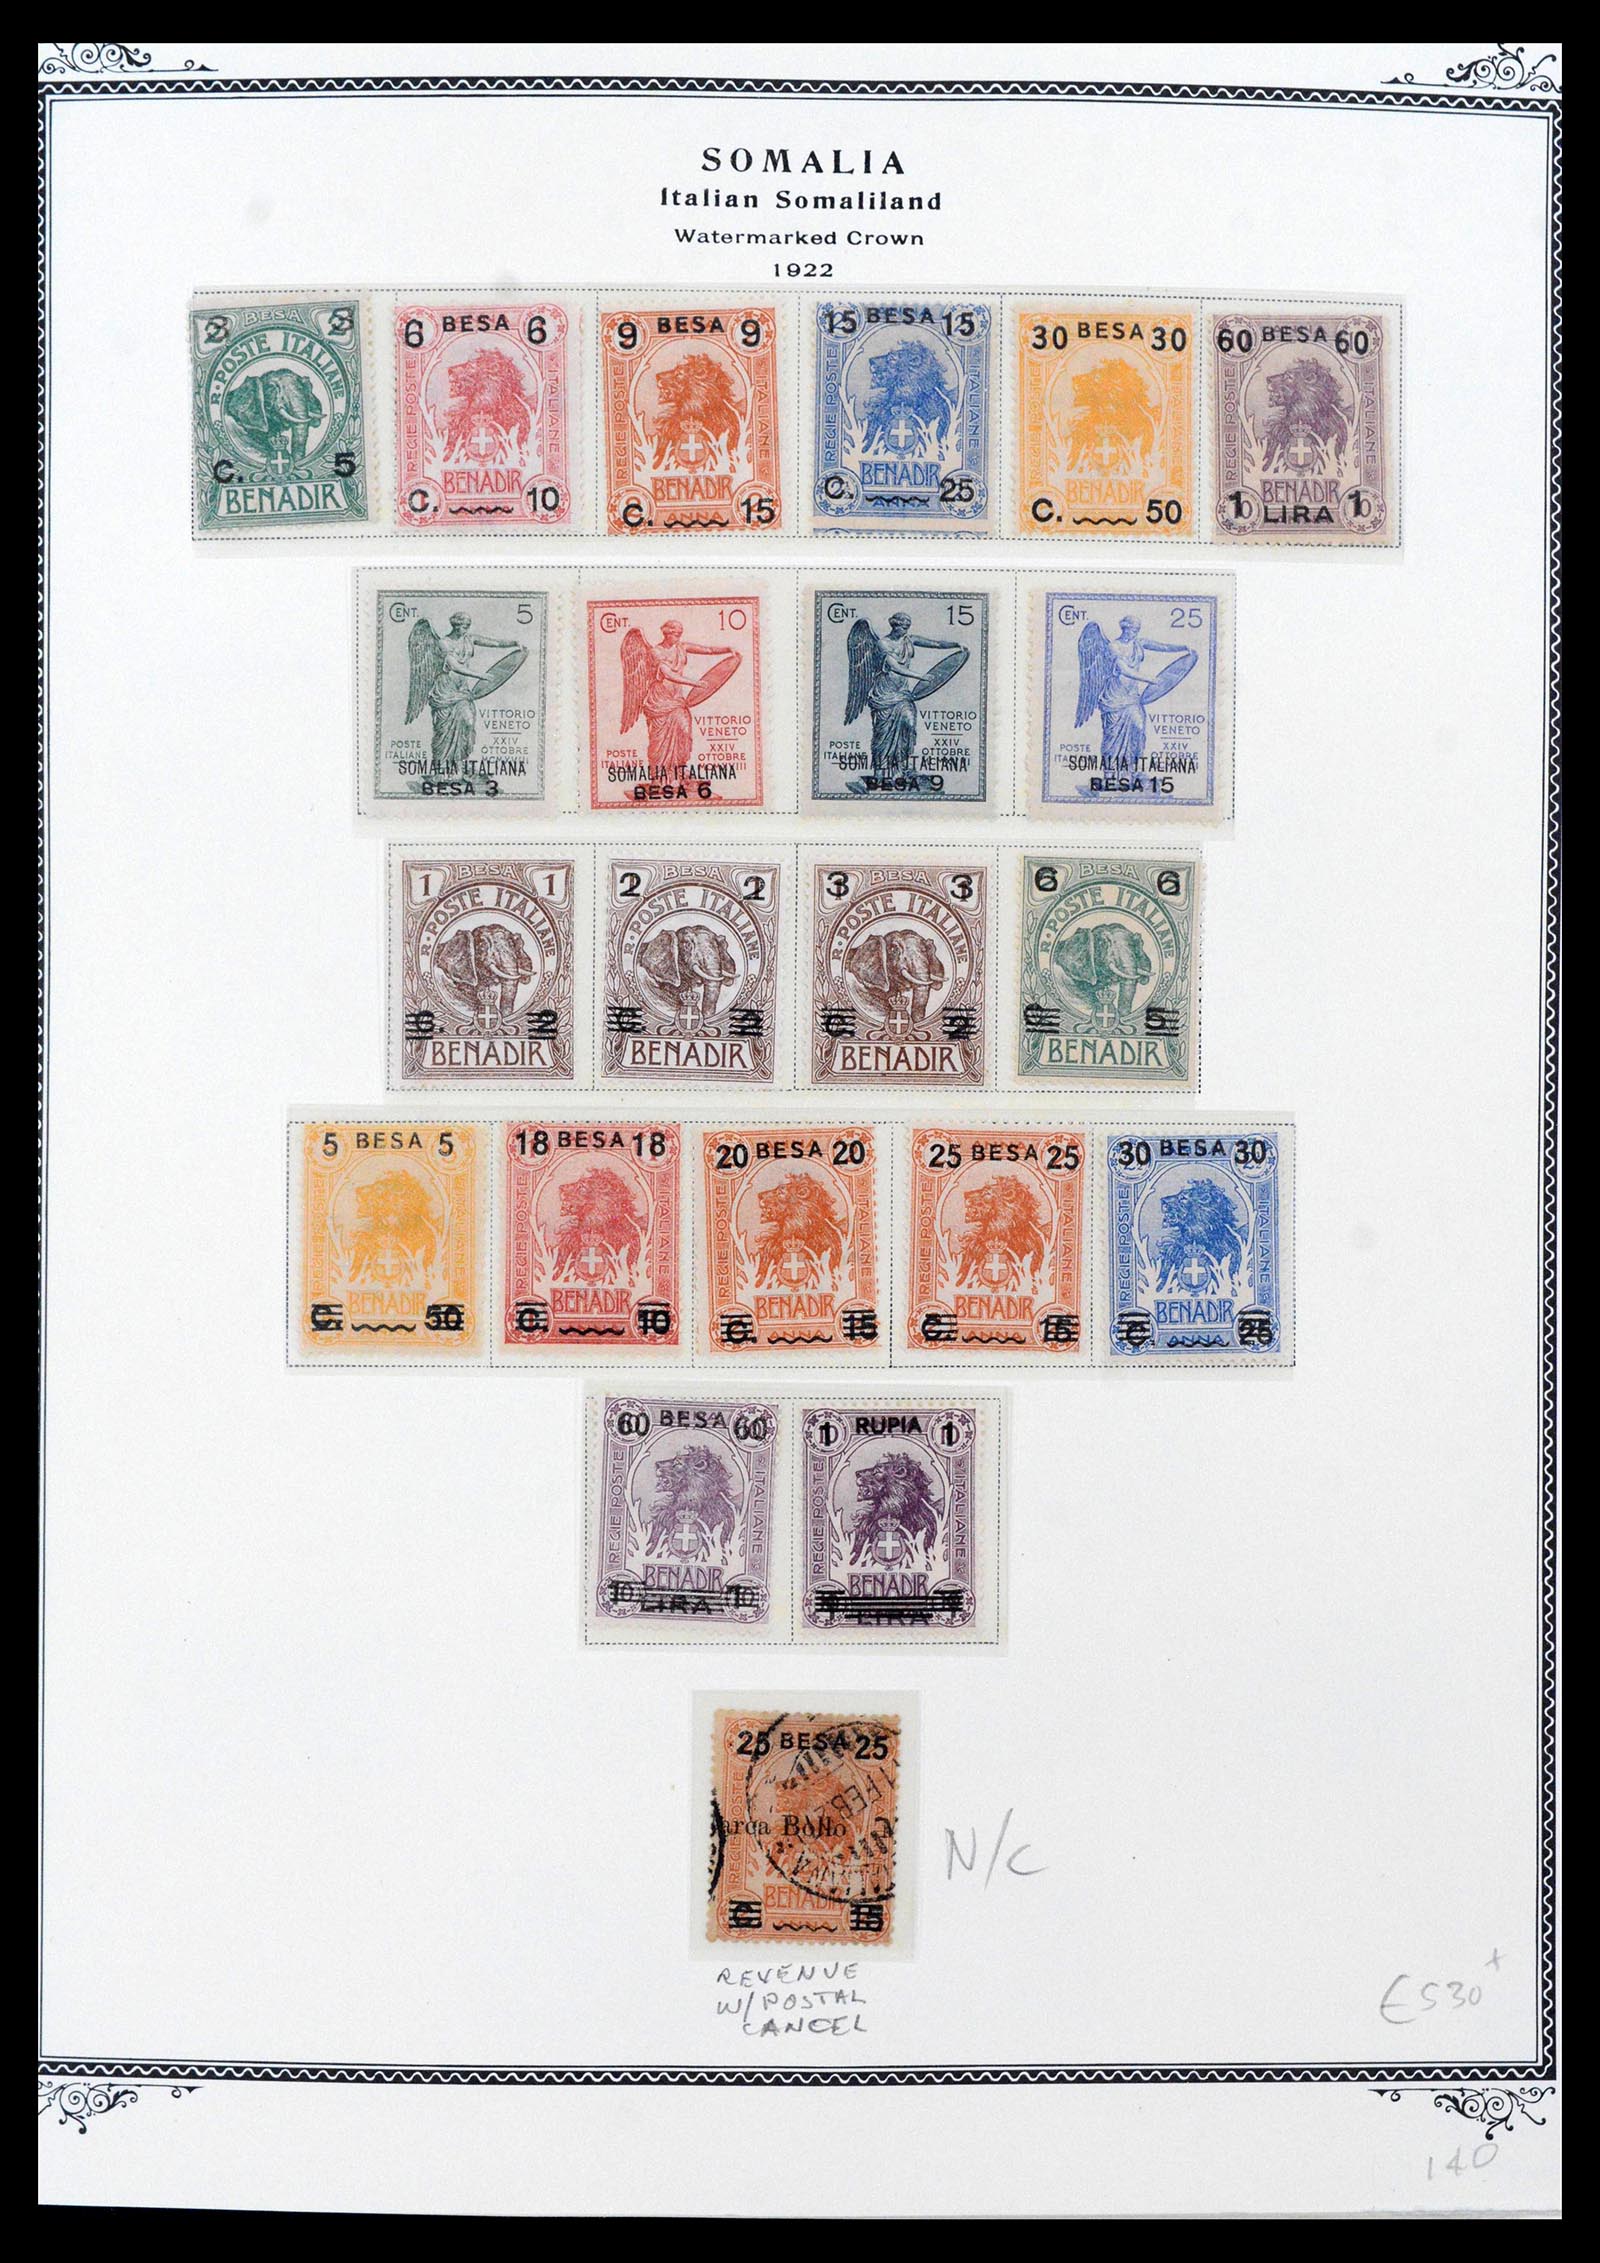 39011 0002 - Stamp collection 39011 Somalia complete 1903-1960.